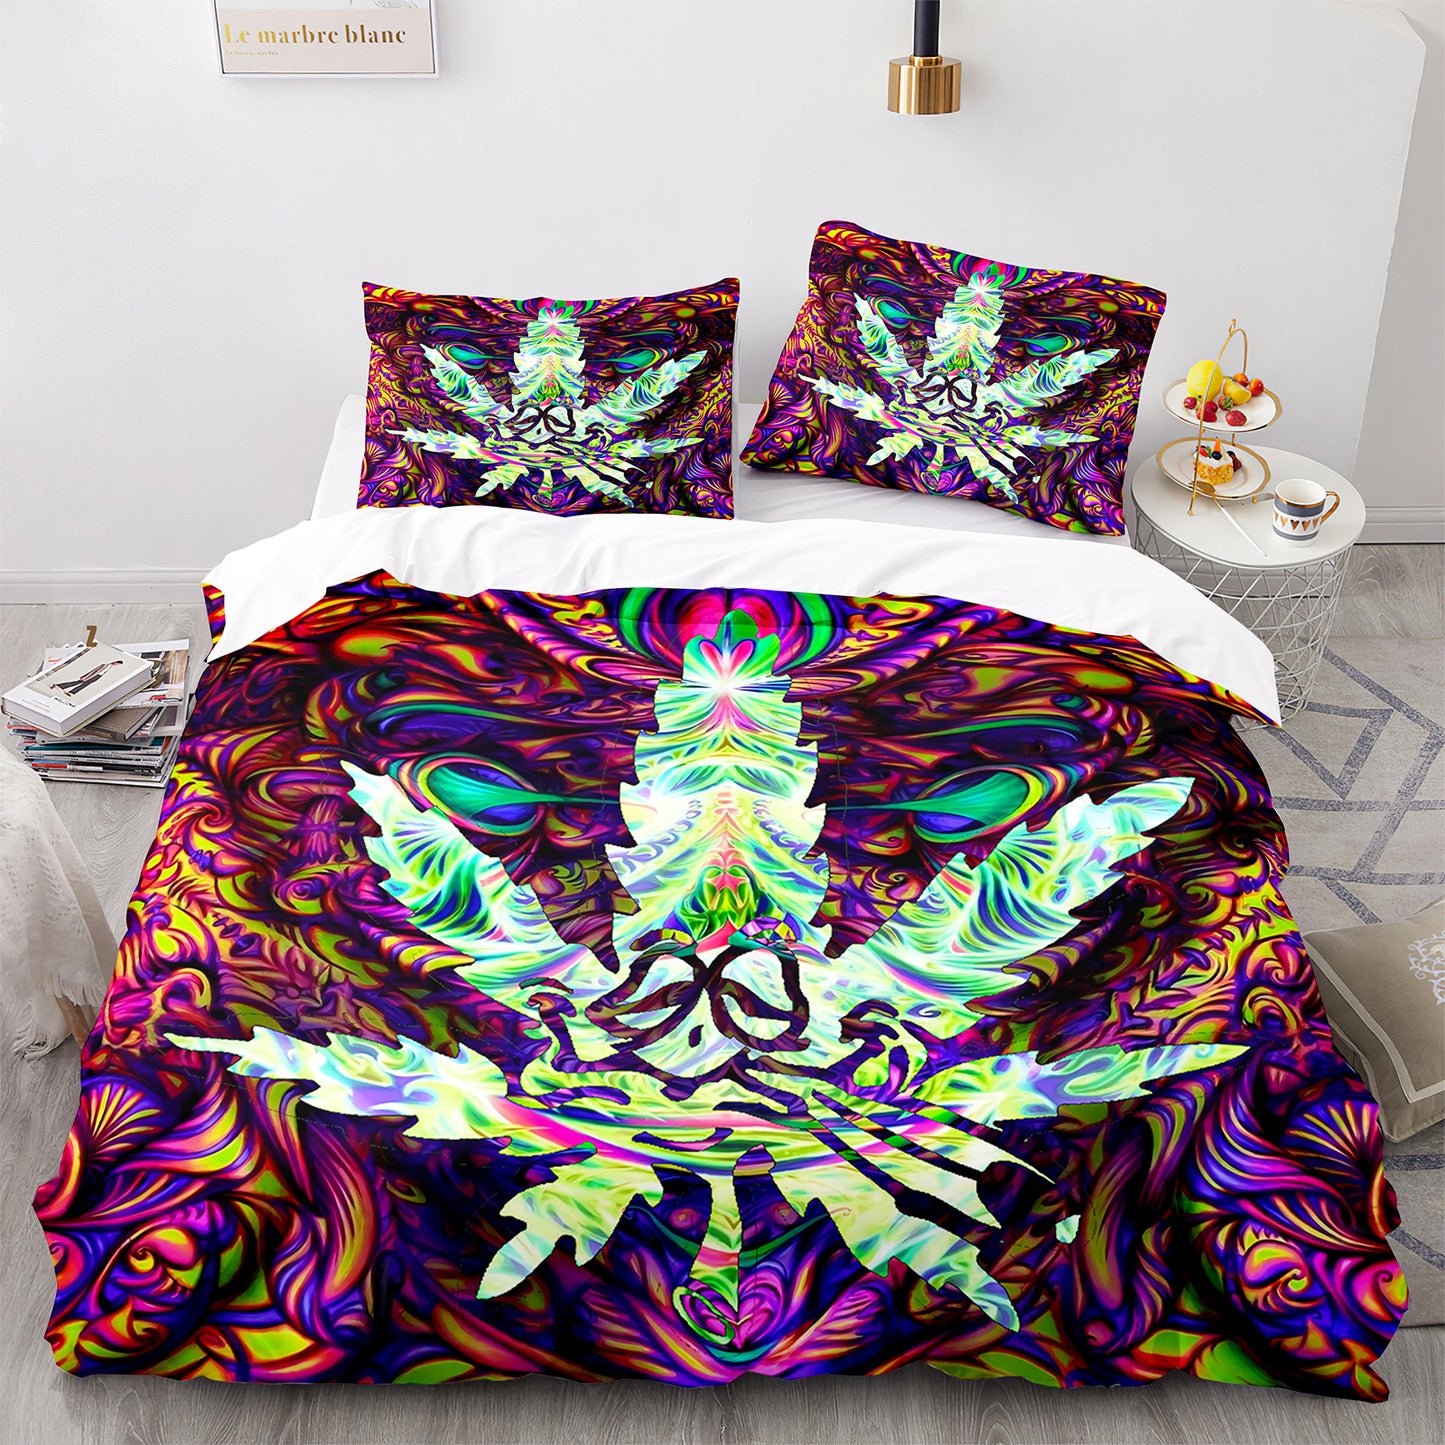 Cutom Duvet Cover Set maple leaf Pattern Chic Comforter Cover King Size for Teens Adults Bedding Set with Pillowcases  FY3012